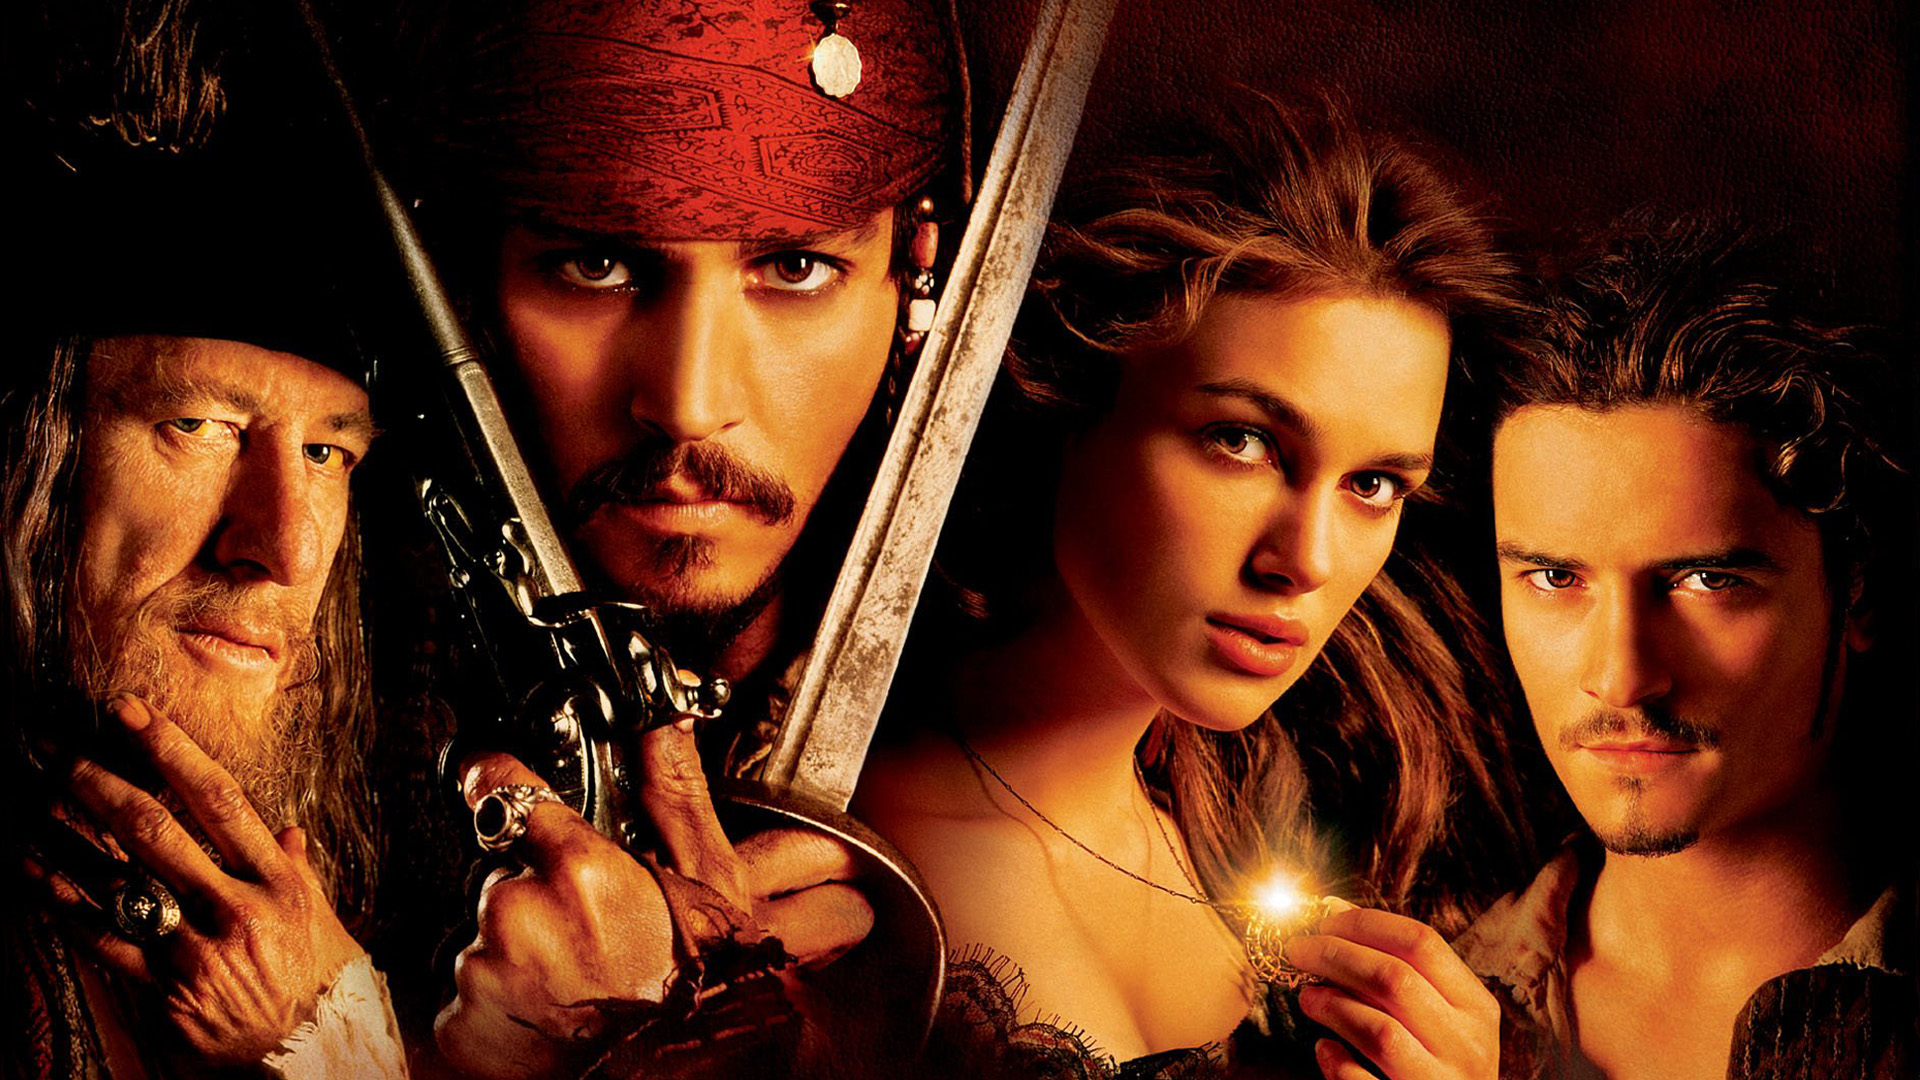 jack sparrow, pirates of the caribbean: the curse of the black pearl, keira knightley, movie, elizabeth swann, geoffrey rush, hector barbossa, johnny depp, orlando bloom, will turner, pirates of the caribbean